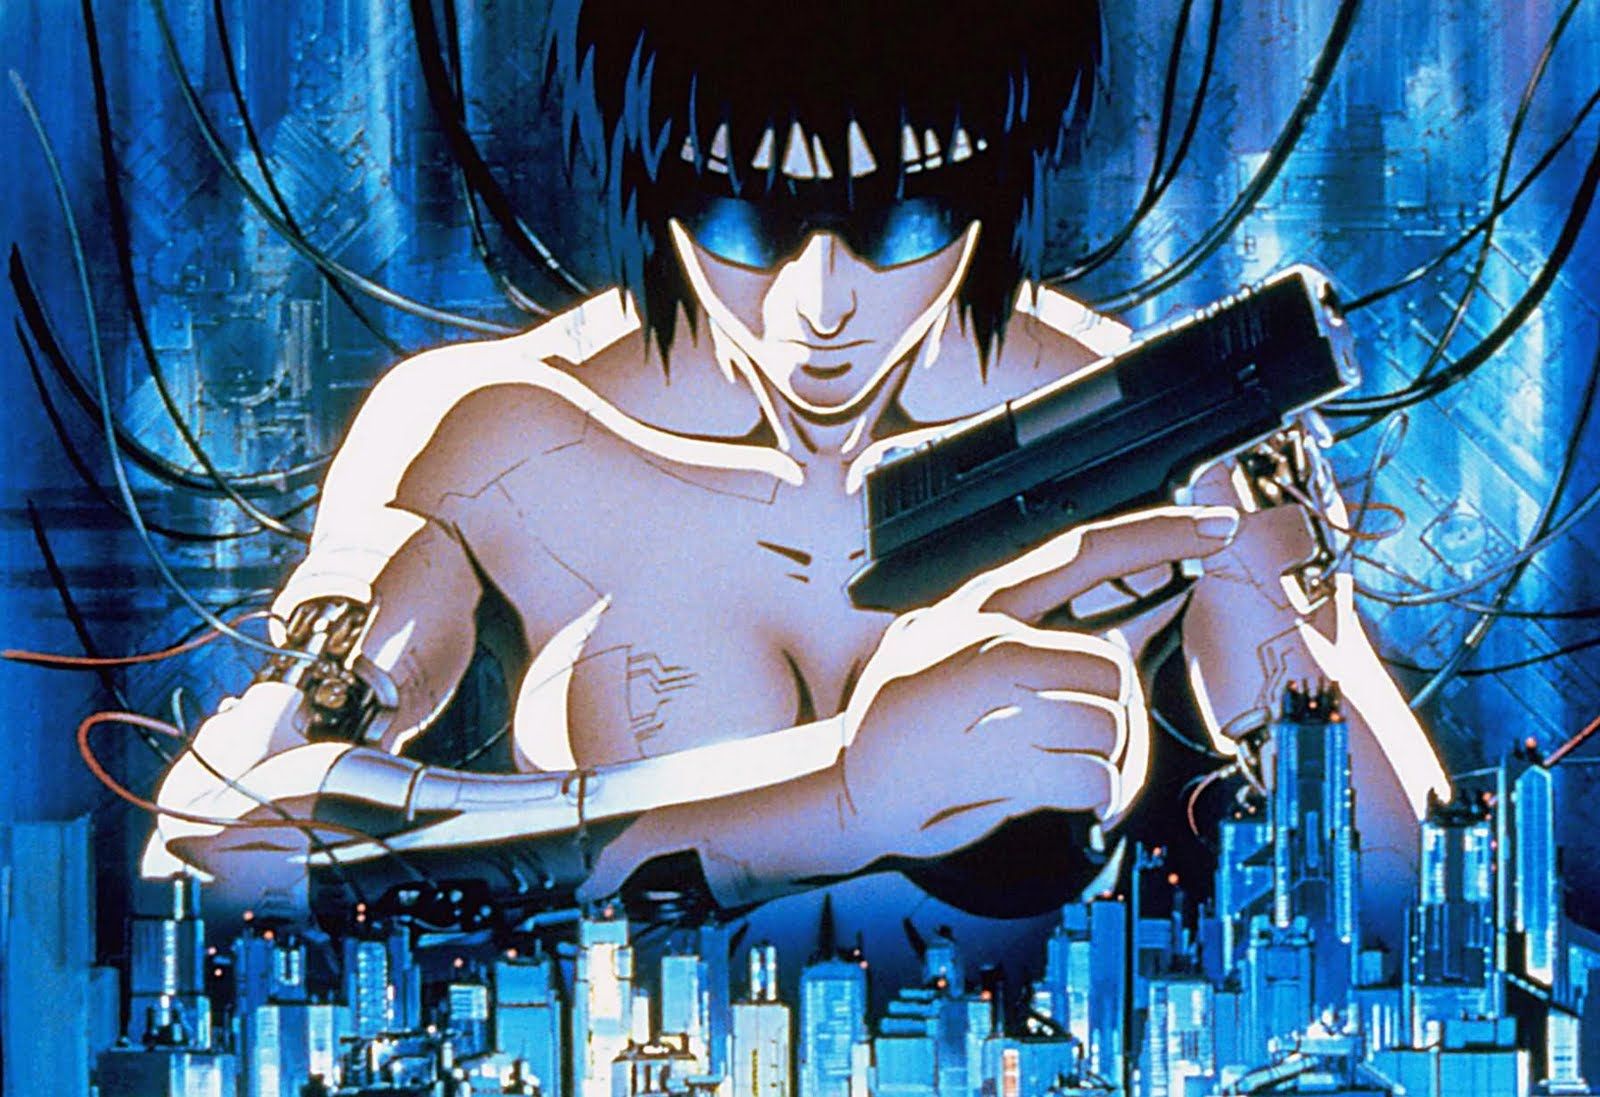 A still from manga’s Ghost in the Shell (1995).